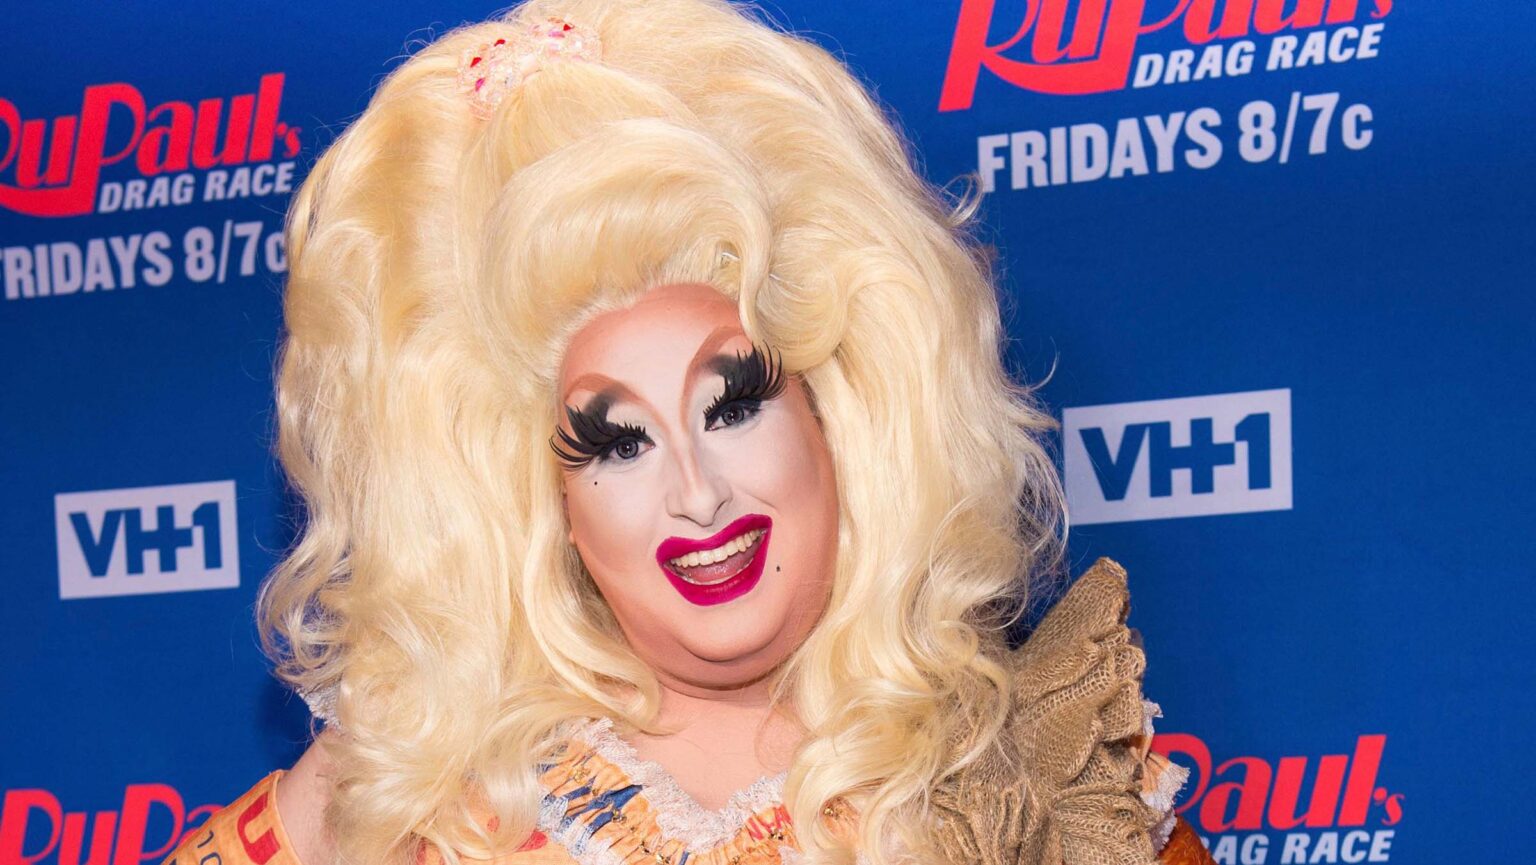 Season 12 of 'Drag Race' is over, yet out of all the queens, one was missing from the finale. But here's the truth about what Sherry Pie did.